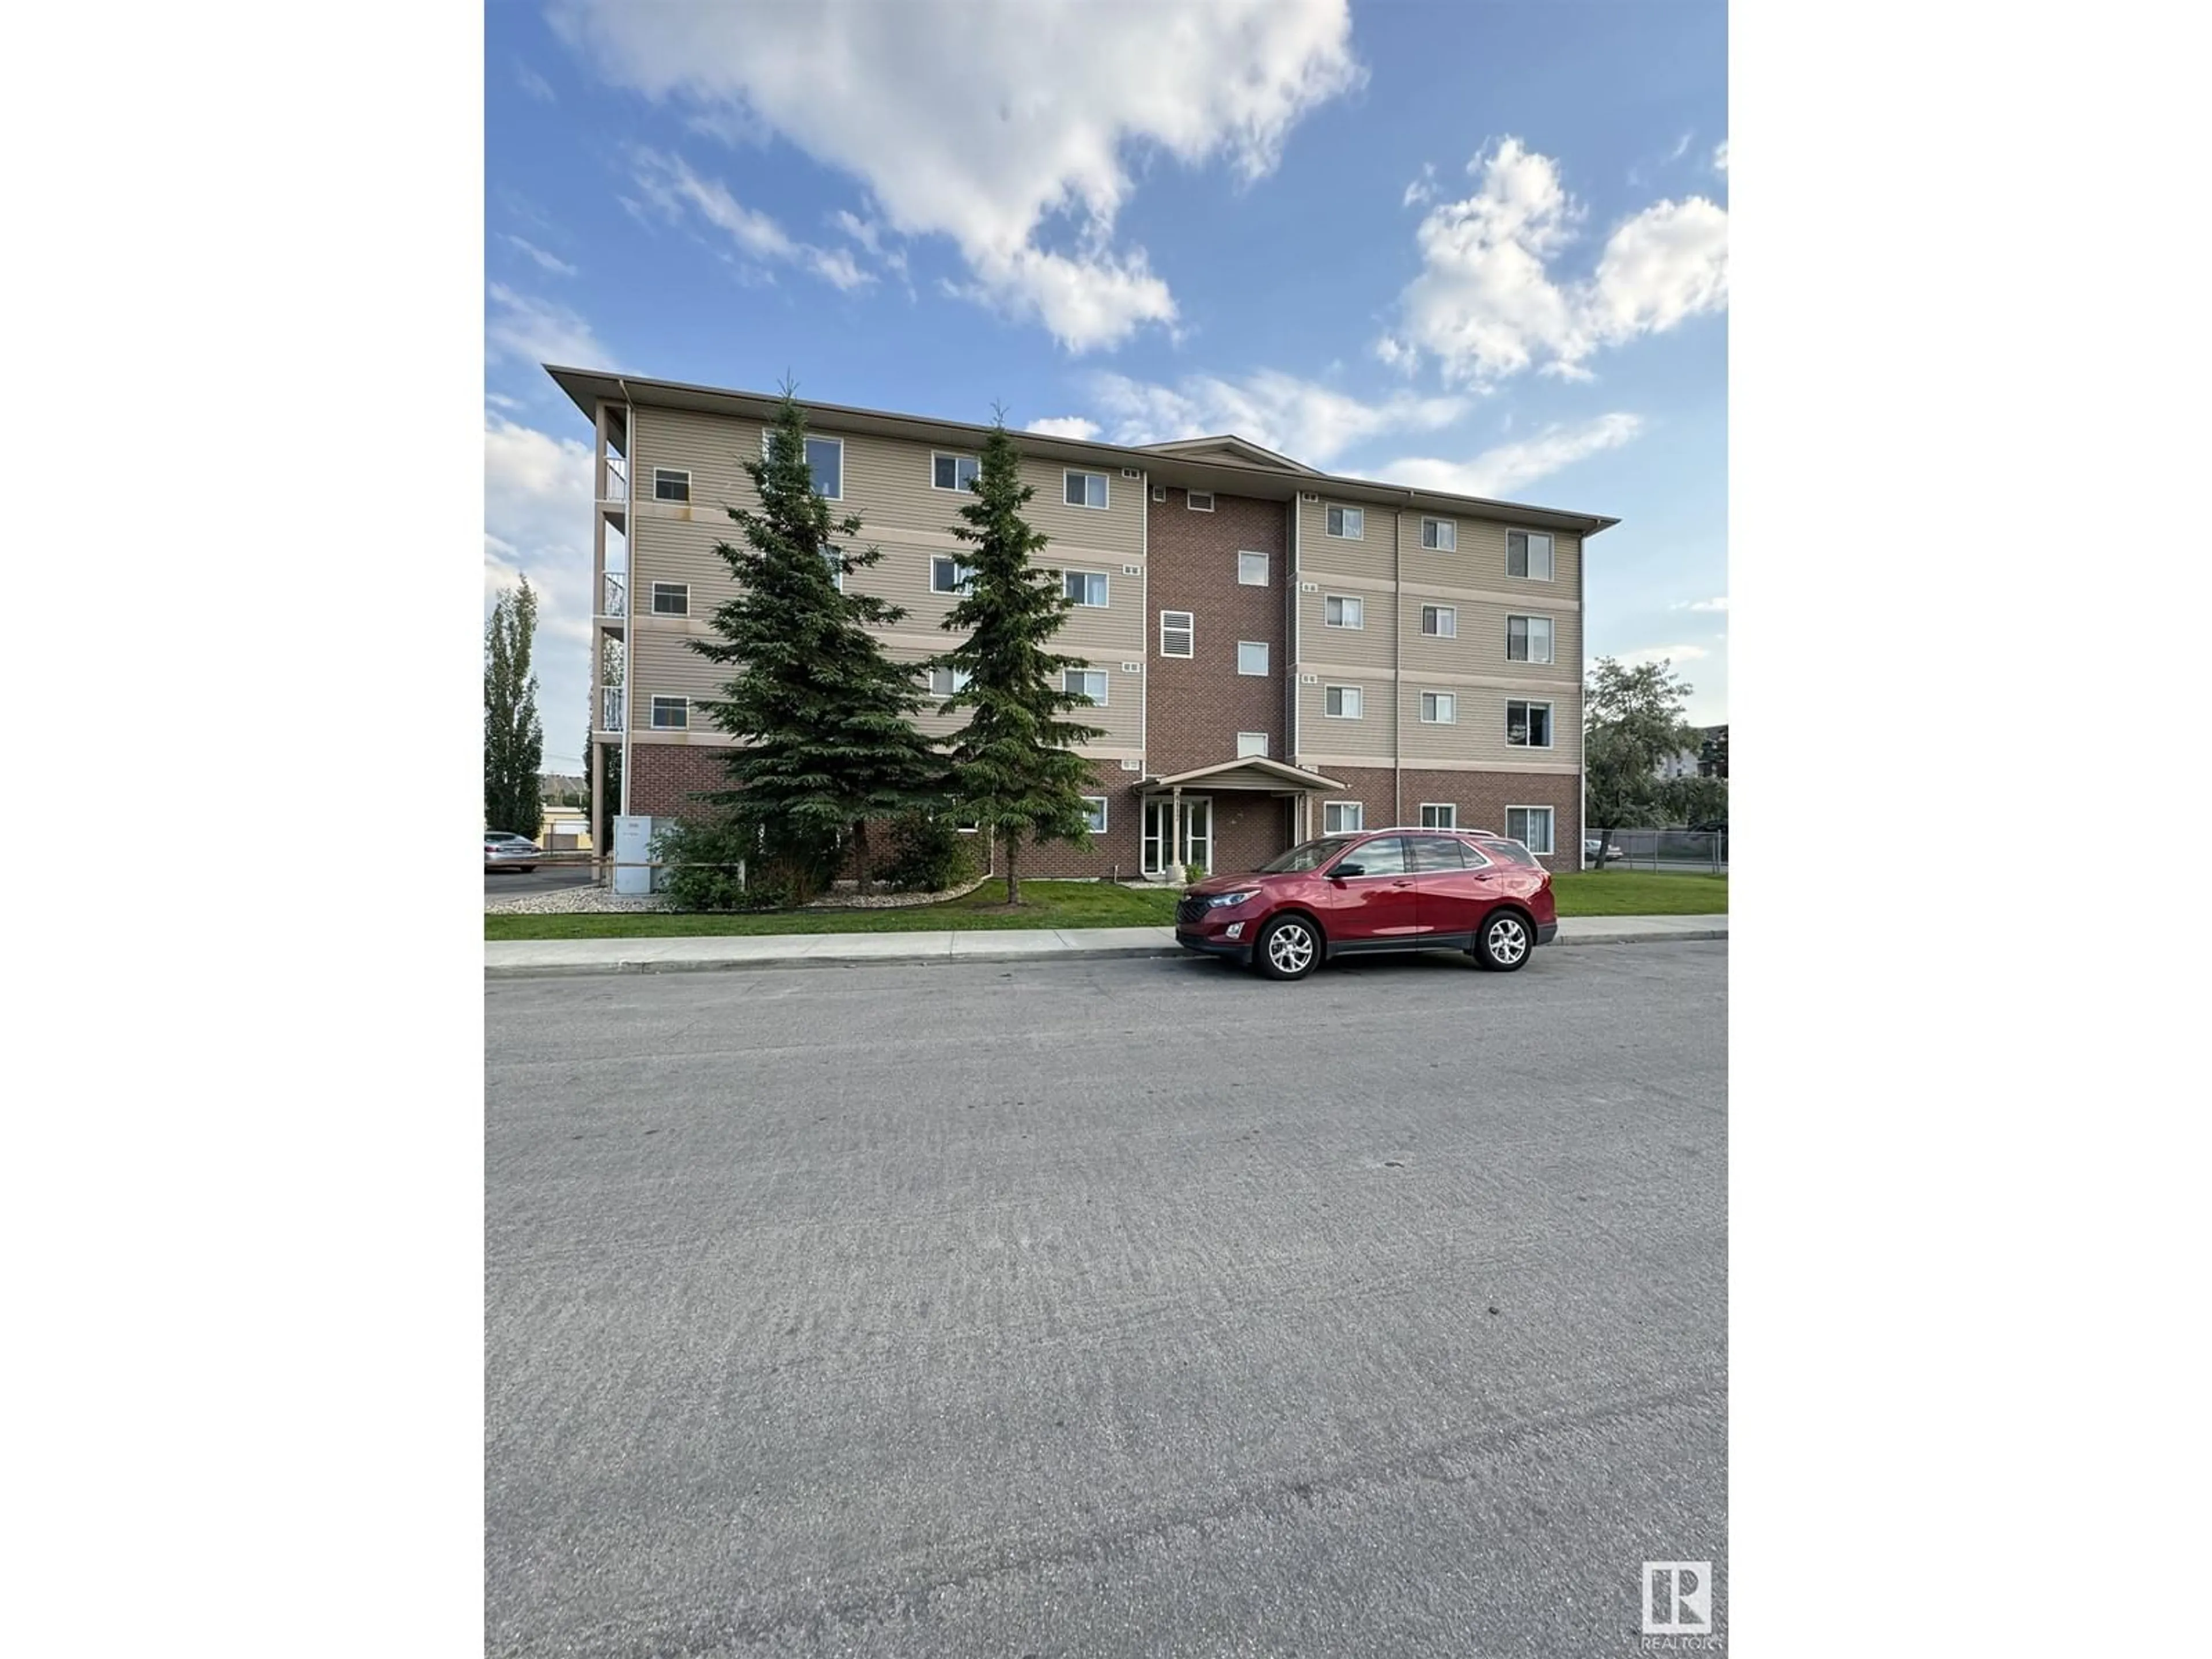 A pic from exterior of the house or condo for #307 8117 114 AV NW, Edmonton Alberta T5B0C1